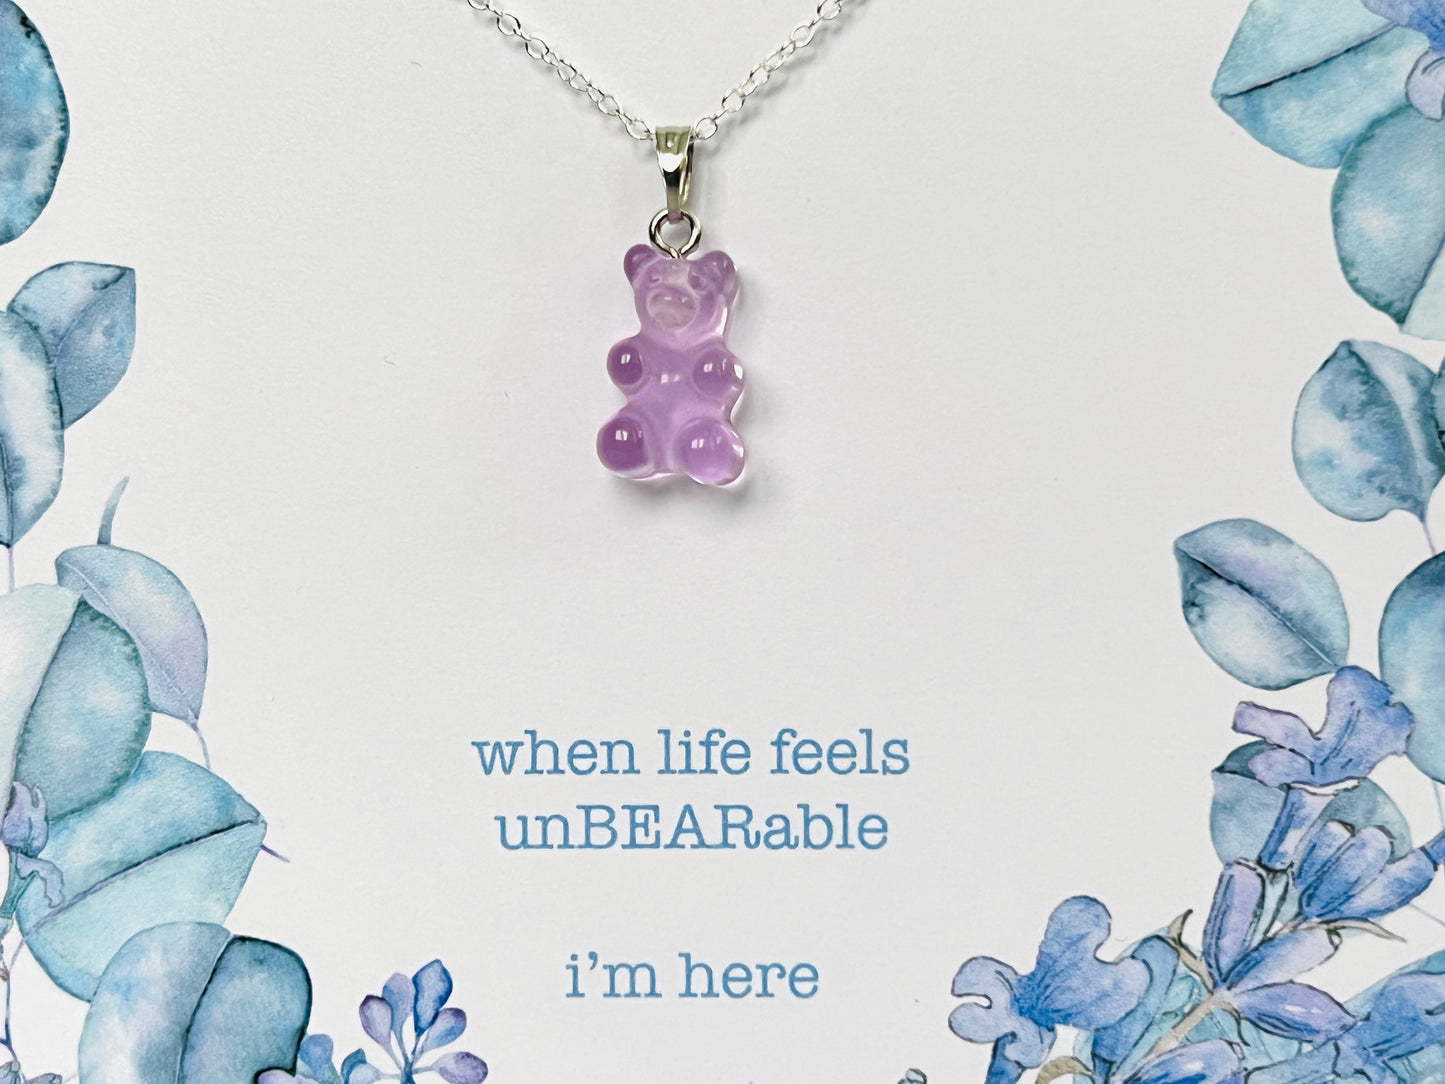 unBEARable Greeting Card with jewelry